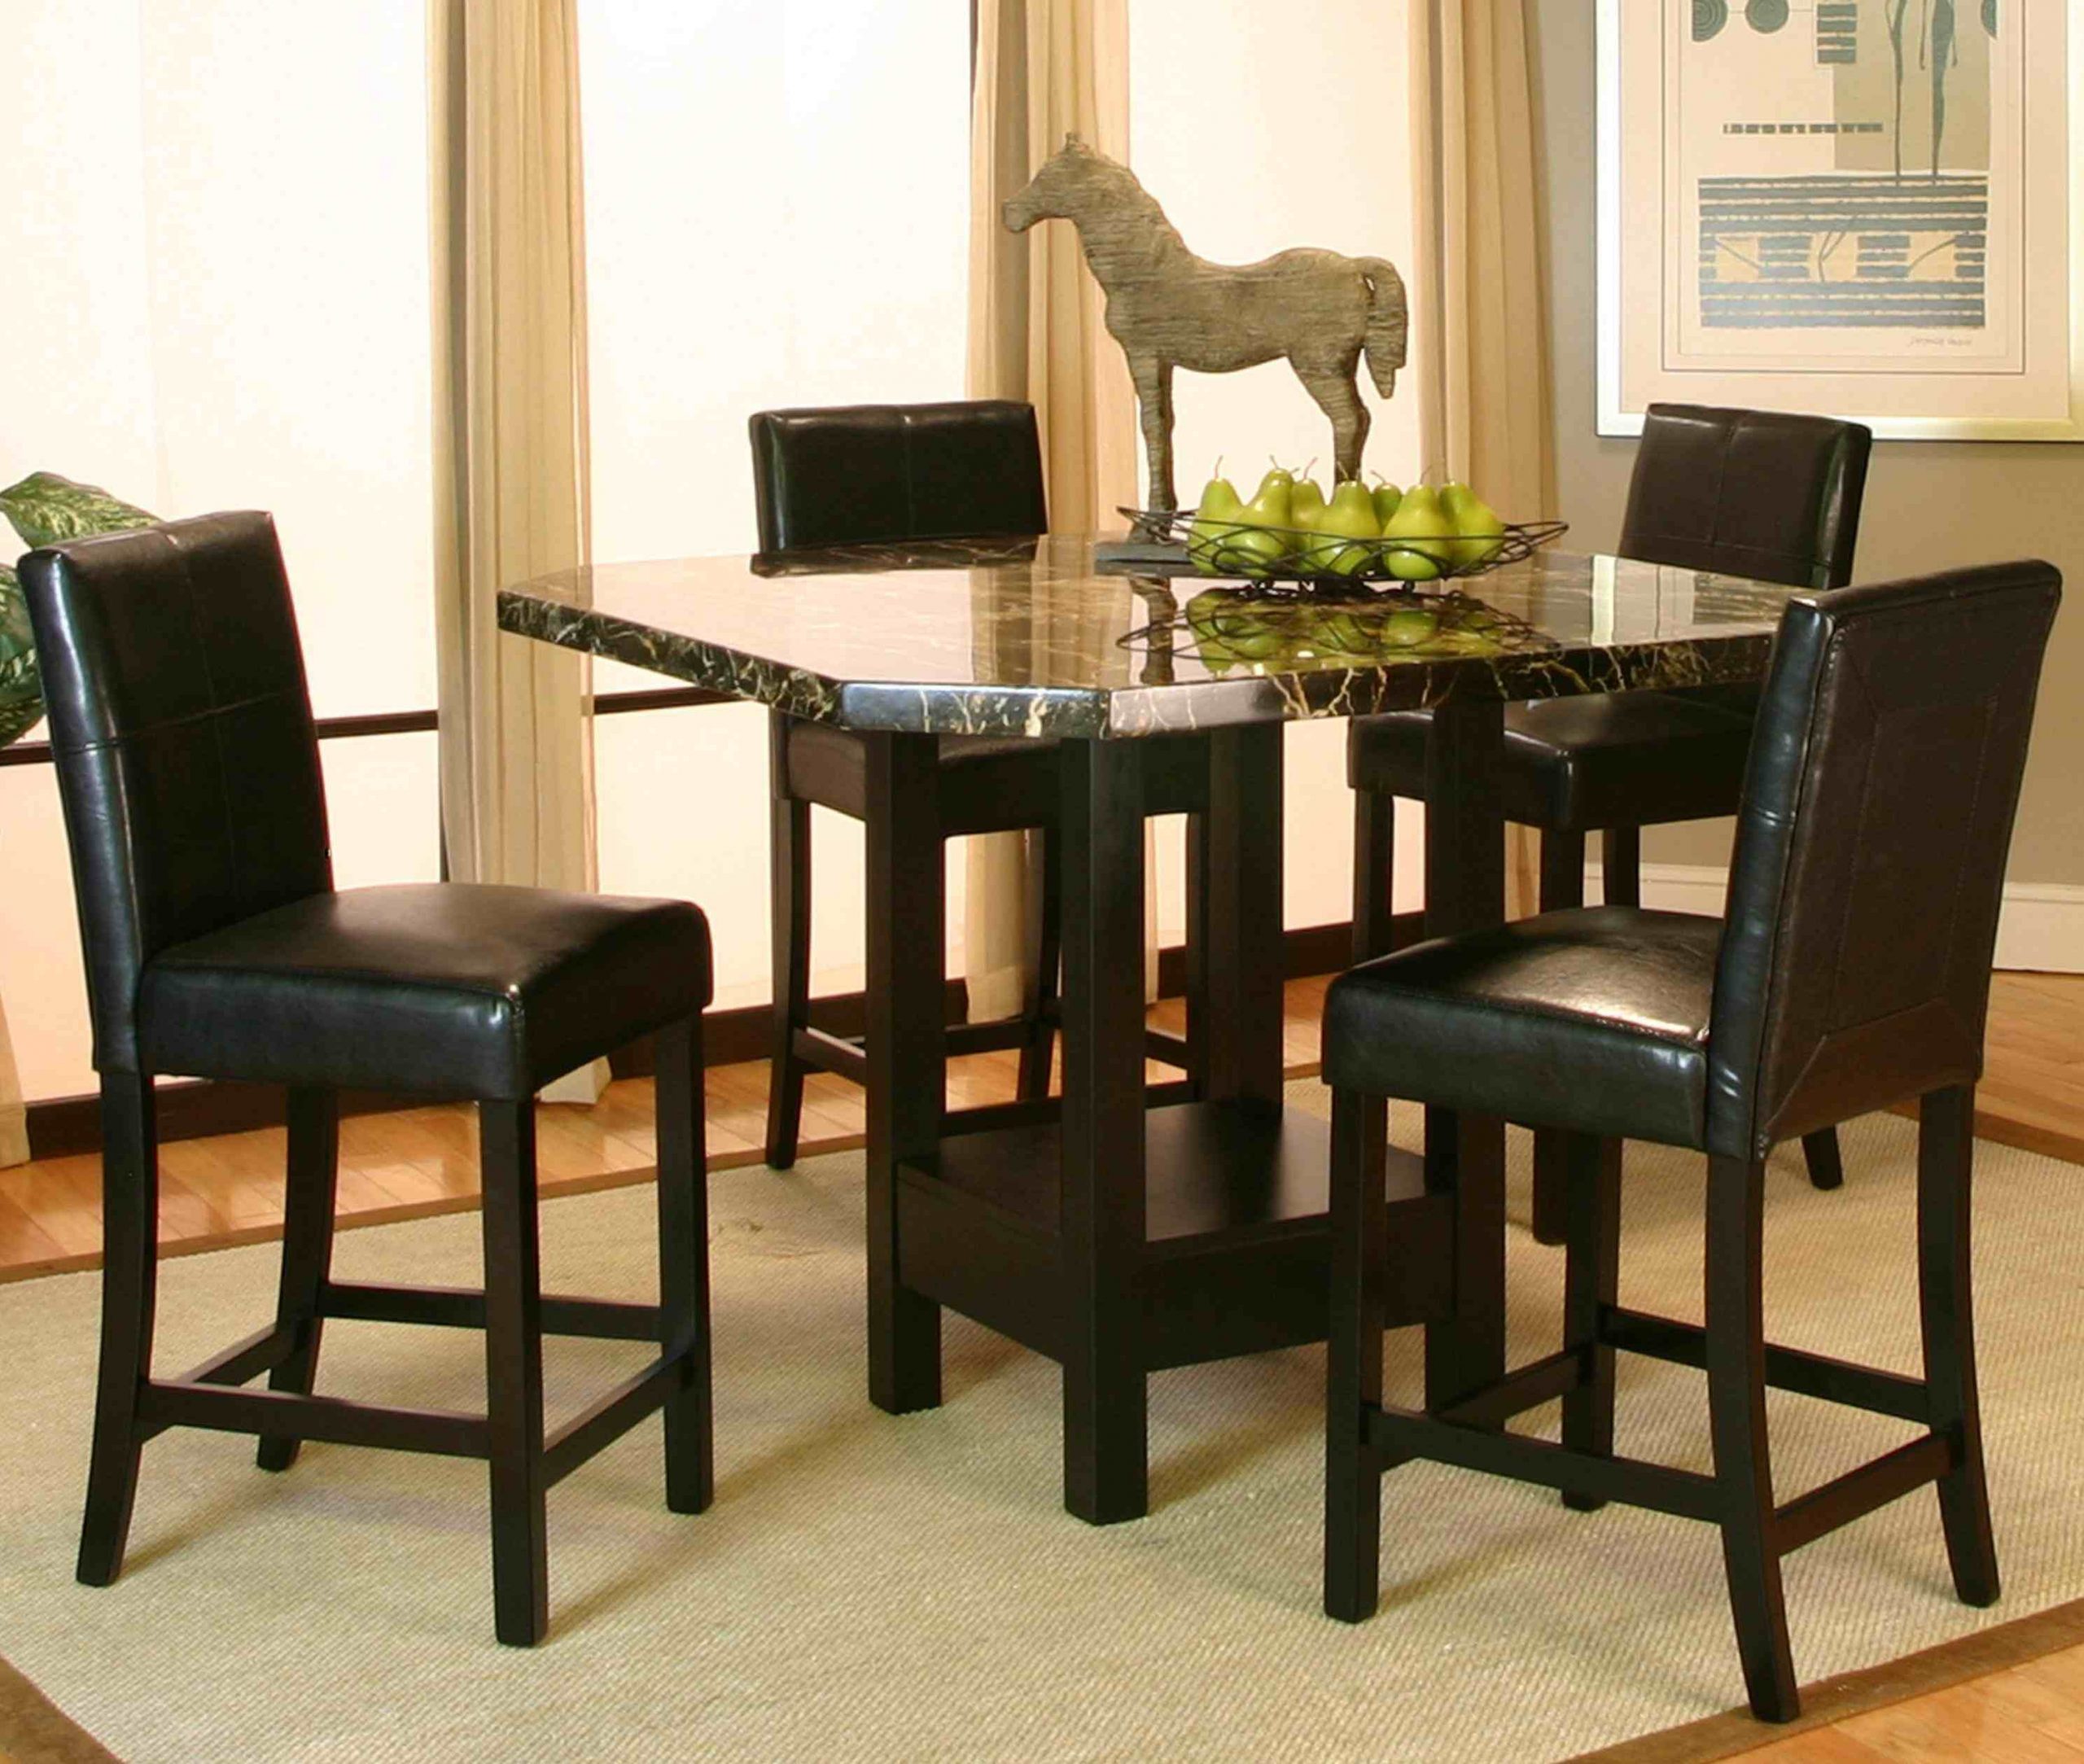 Dining Room Tables Under 300 2019 Home Design for measurements 2977 X 2520